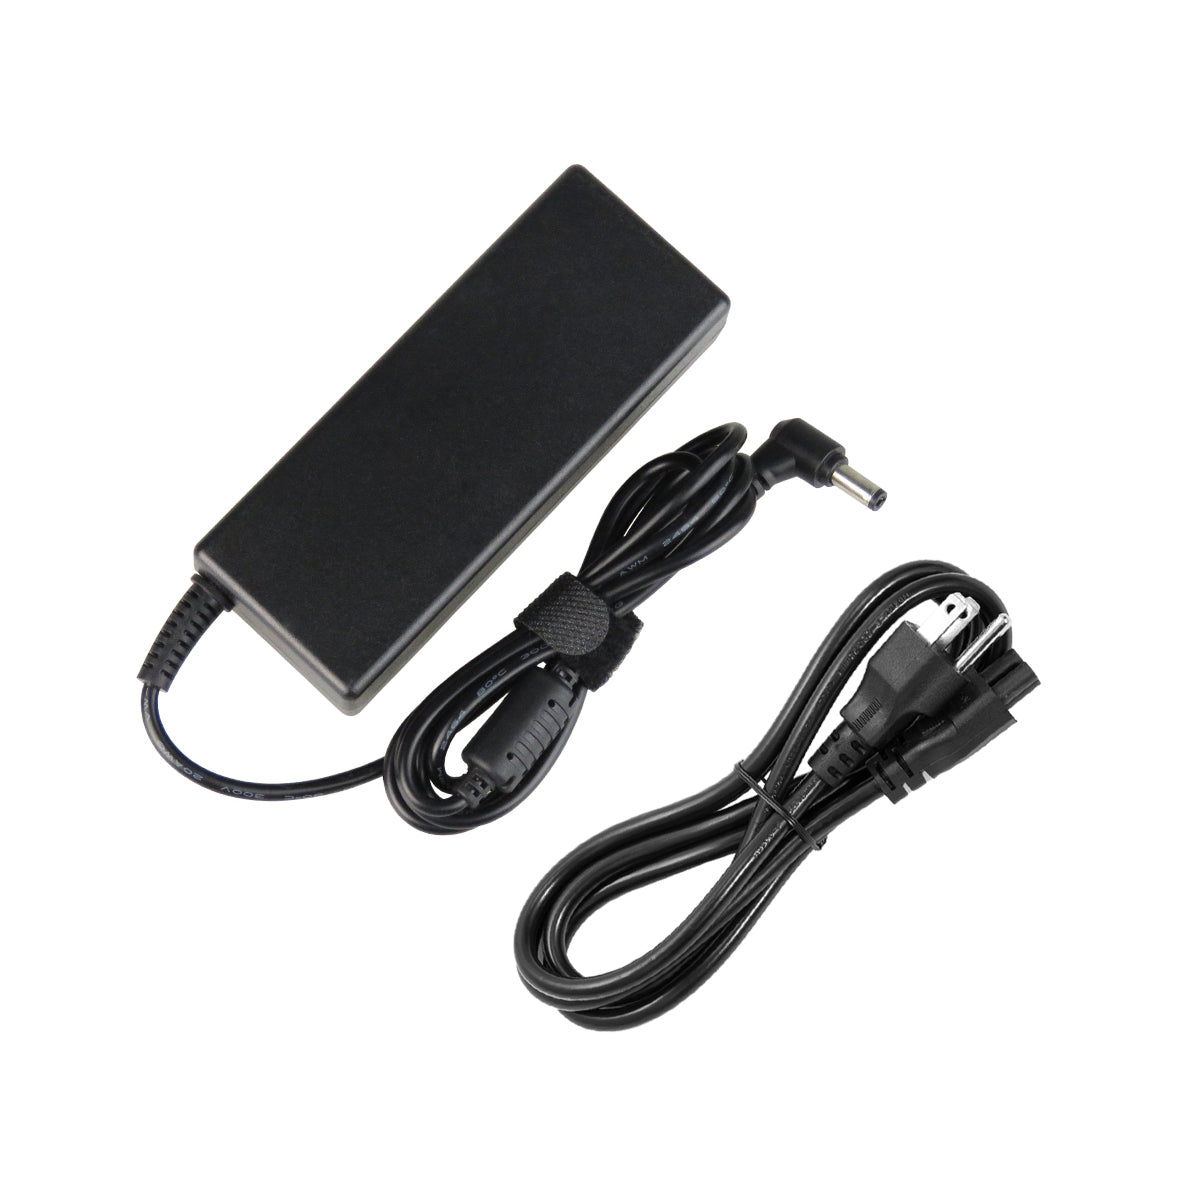 AC Adapter Charger for ASUS N61VG Notebook.